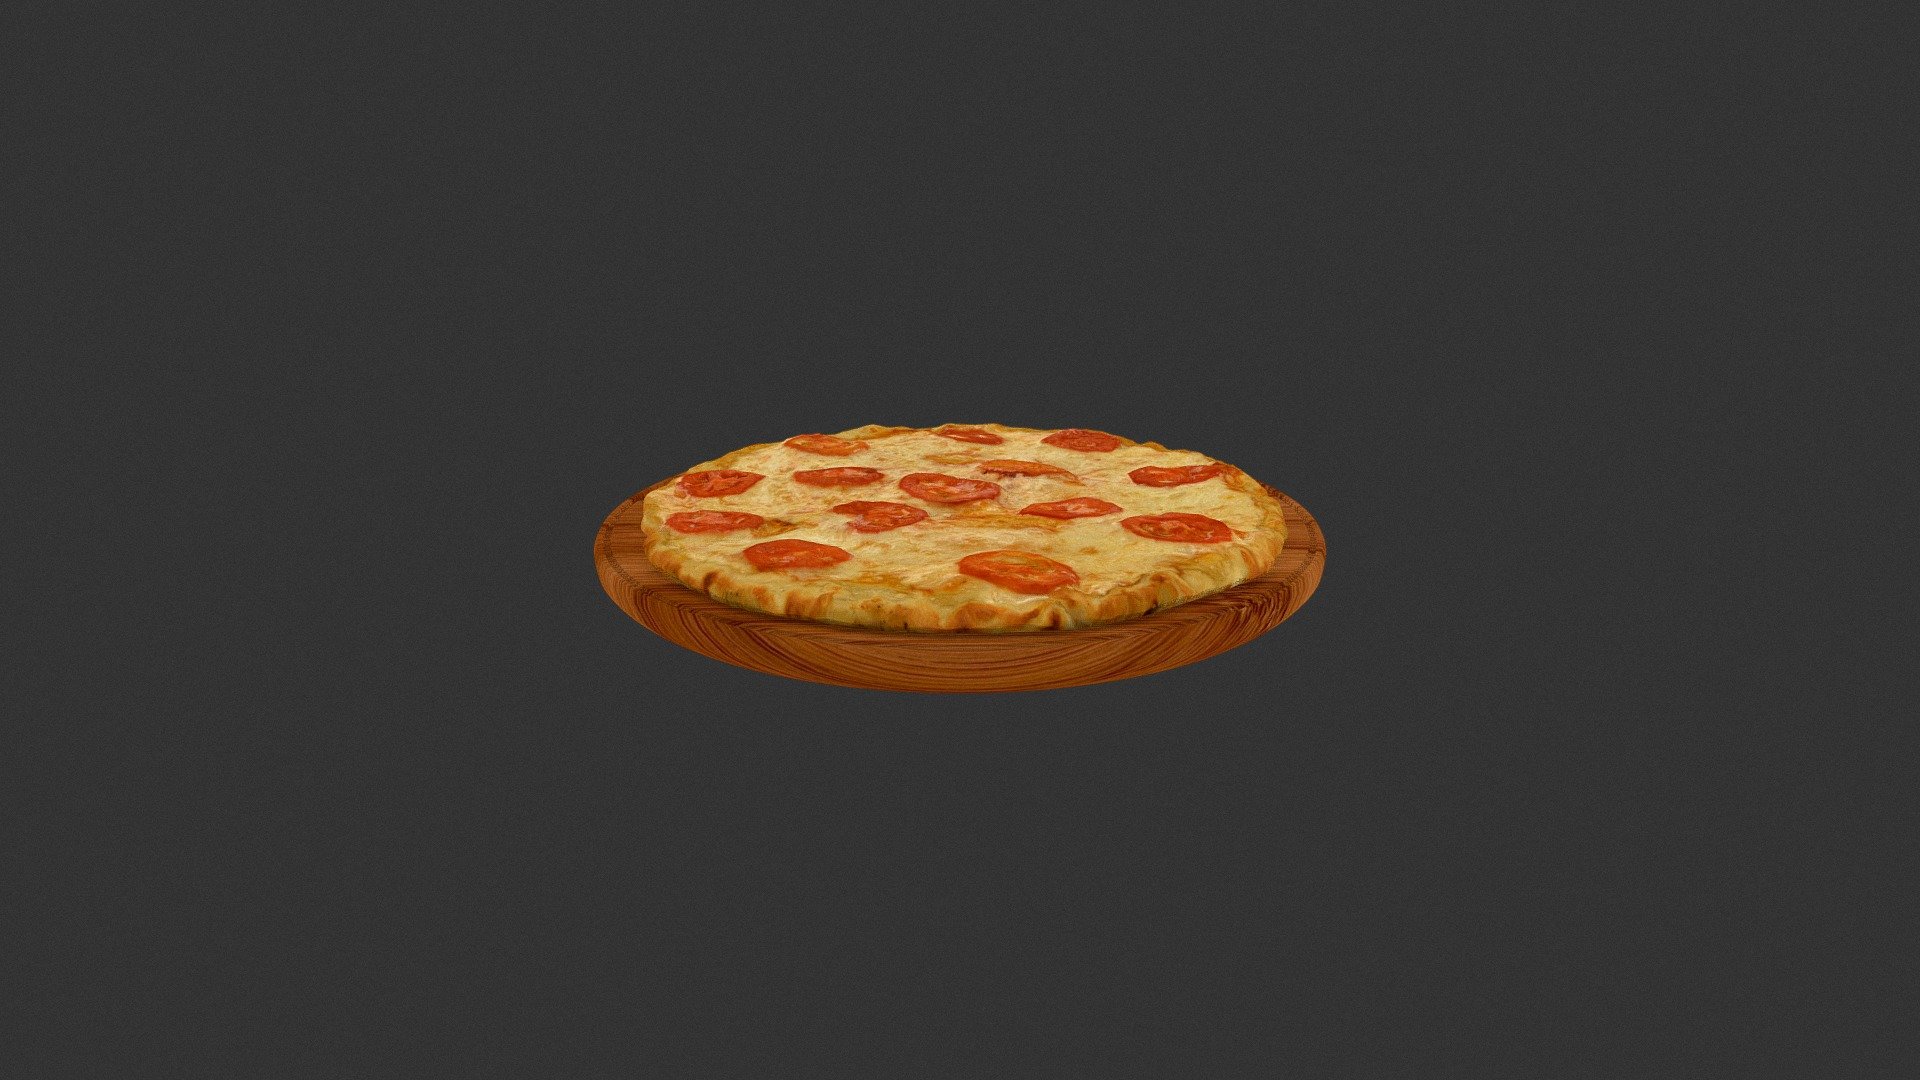 Піца Маргарита (Tomatoes_pizza) - 3D model by alex.alexandrov.a 3d model